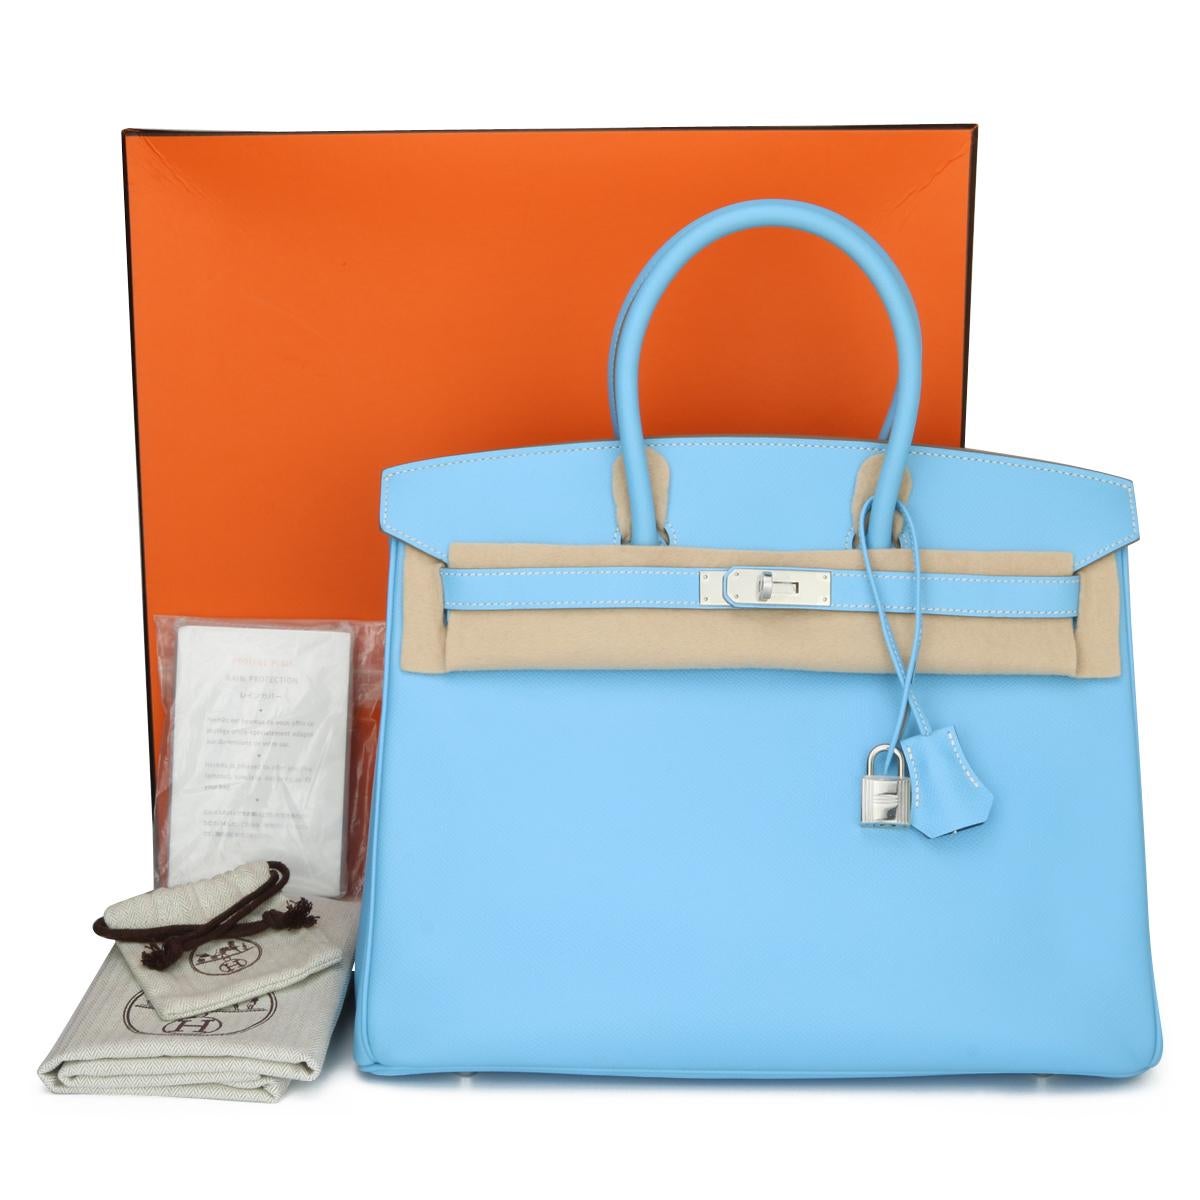 Authentic Hermès Birkin Bag 35cm Candy Collection Blue Celeste & Mykonos Epsom Leather with Palladium Hardware Stamp P_Year 2012.

This bag is still in a brand new condition. The leather still smells fresh as when new, along with it still holding to